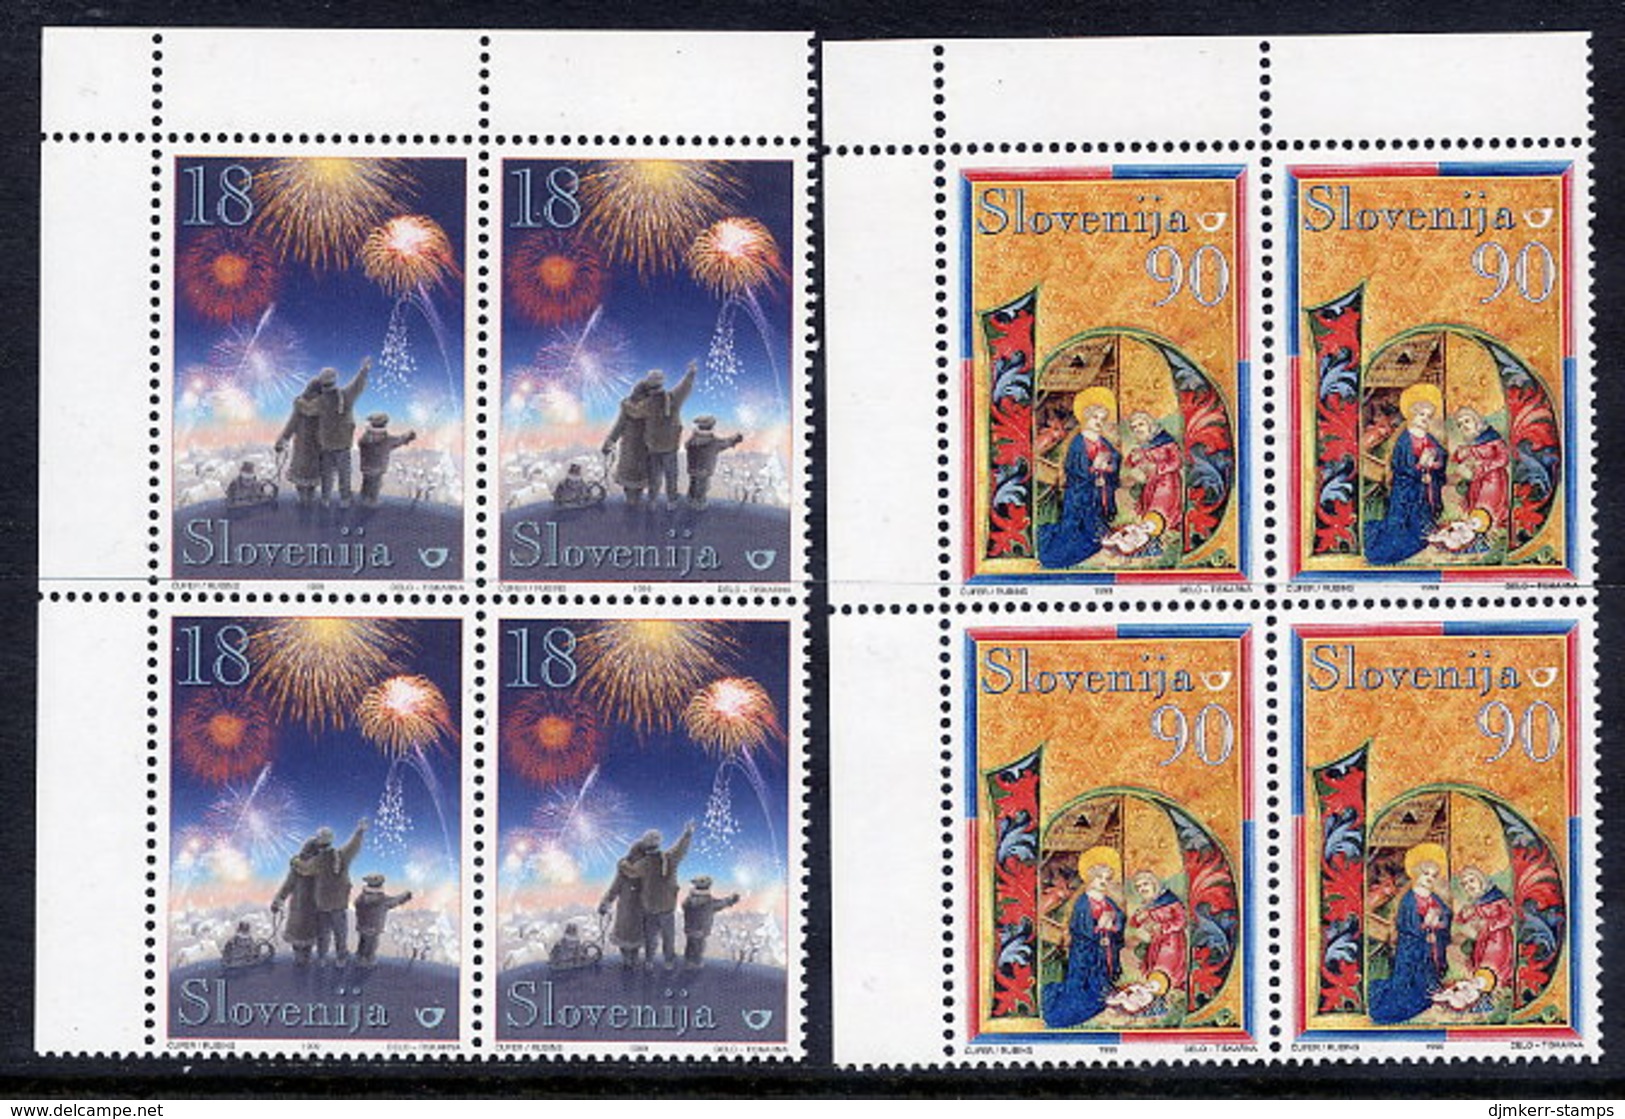 SLOVENIA 1999 Christmas 18 T. And 90 T. From Sheets Blocks Of 4 MNH / **.  Michel 277, 279 - Slovenië